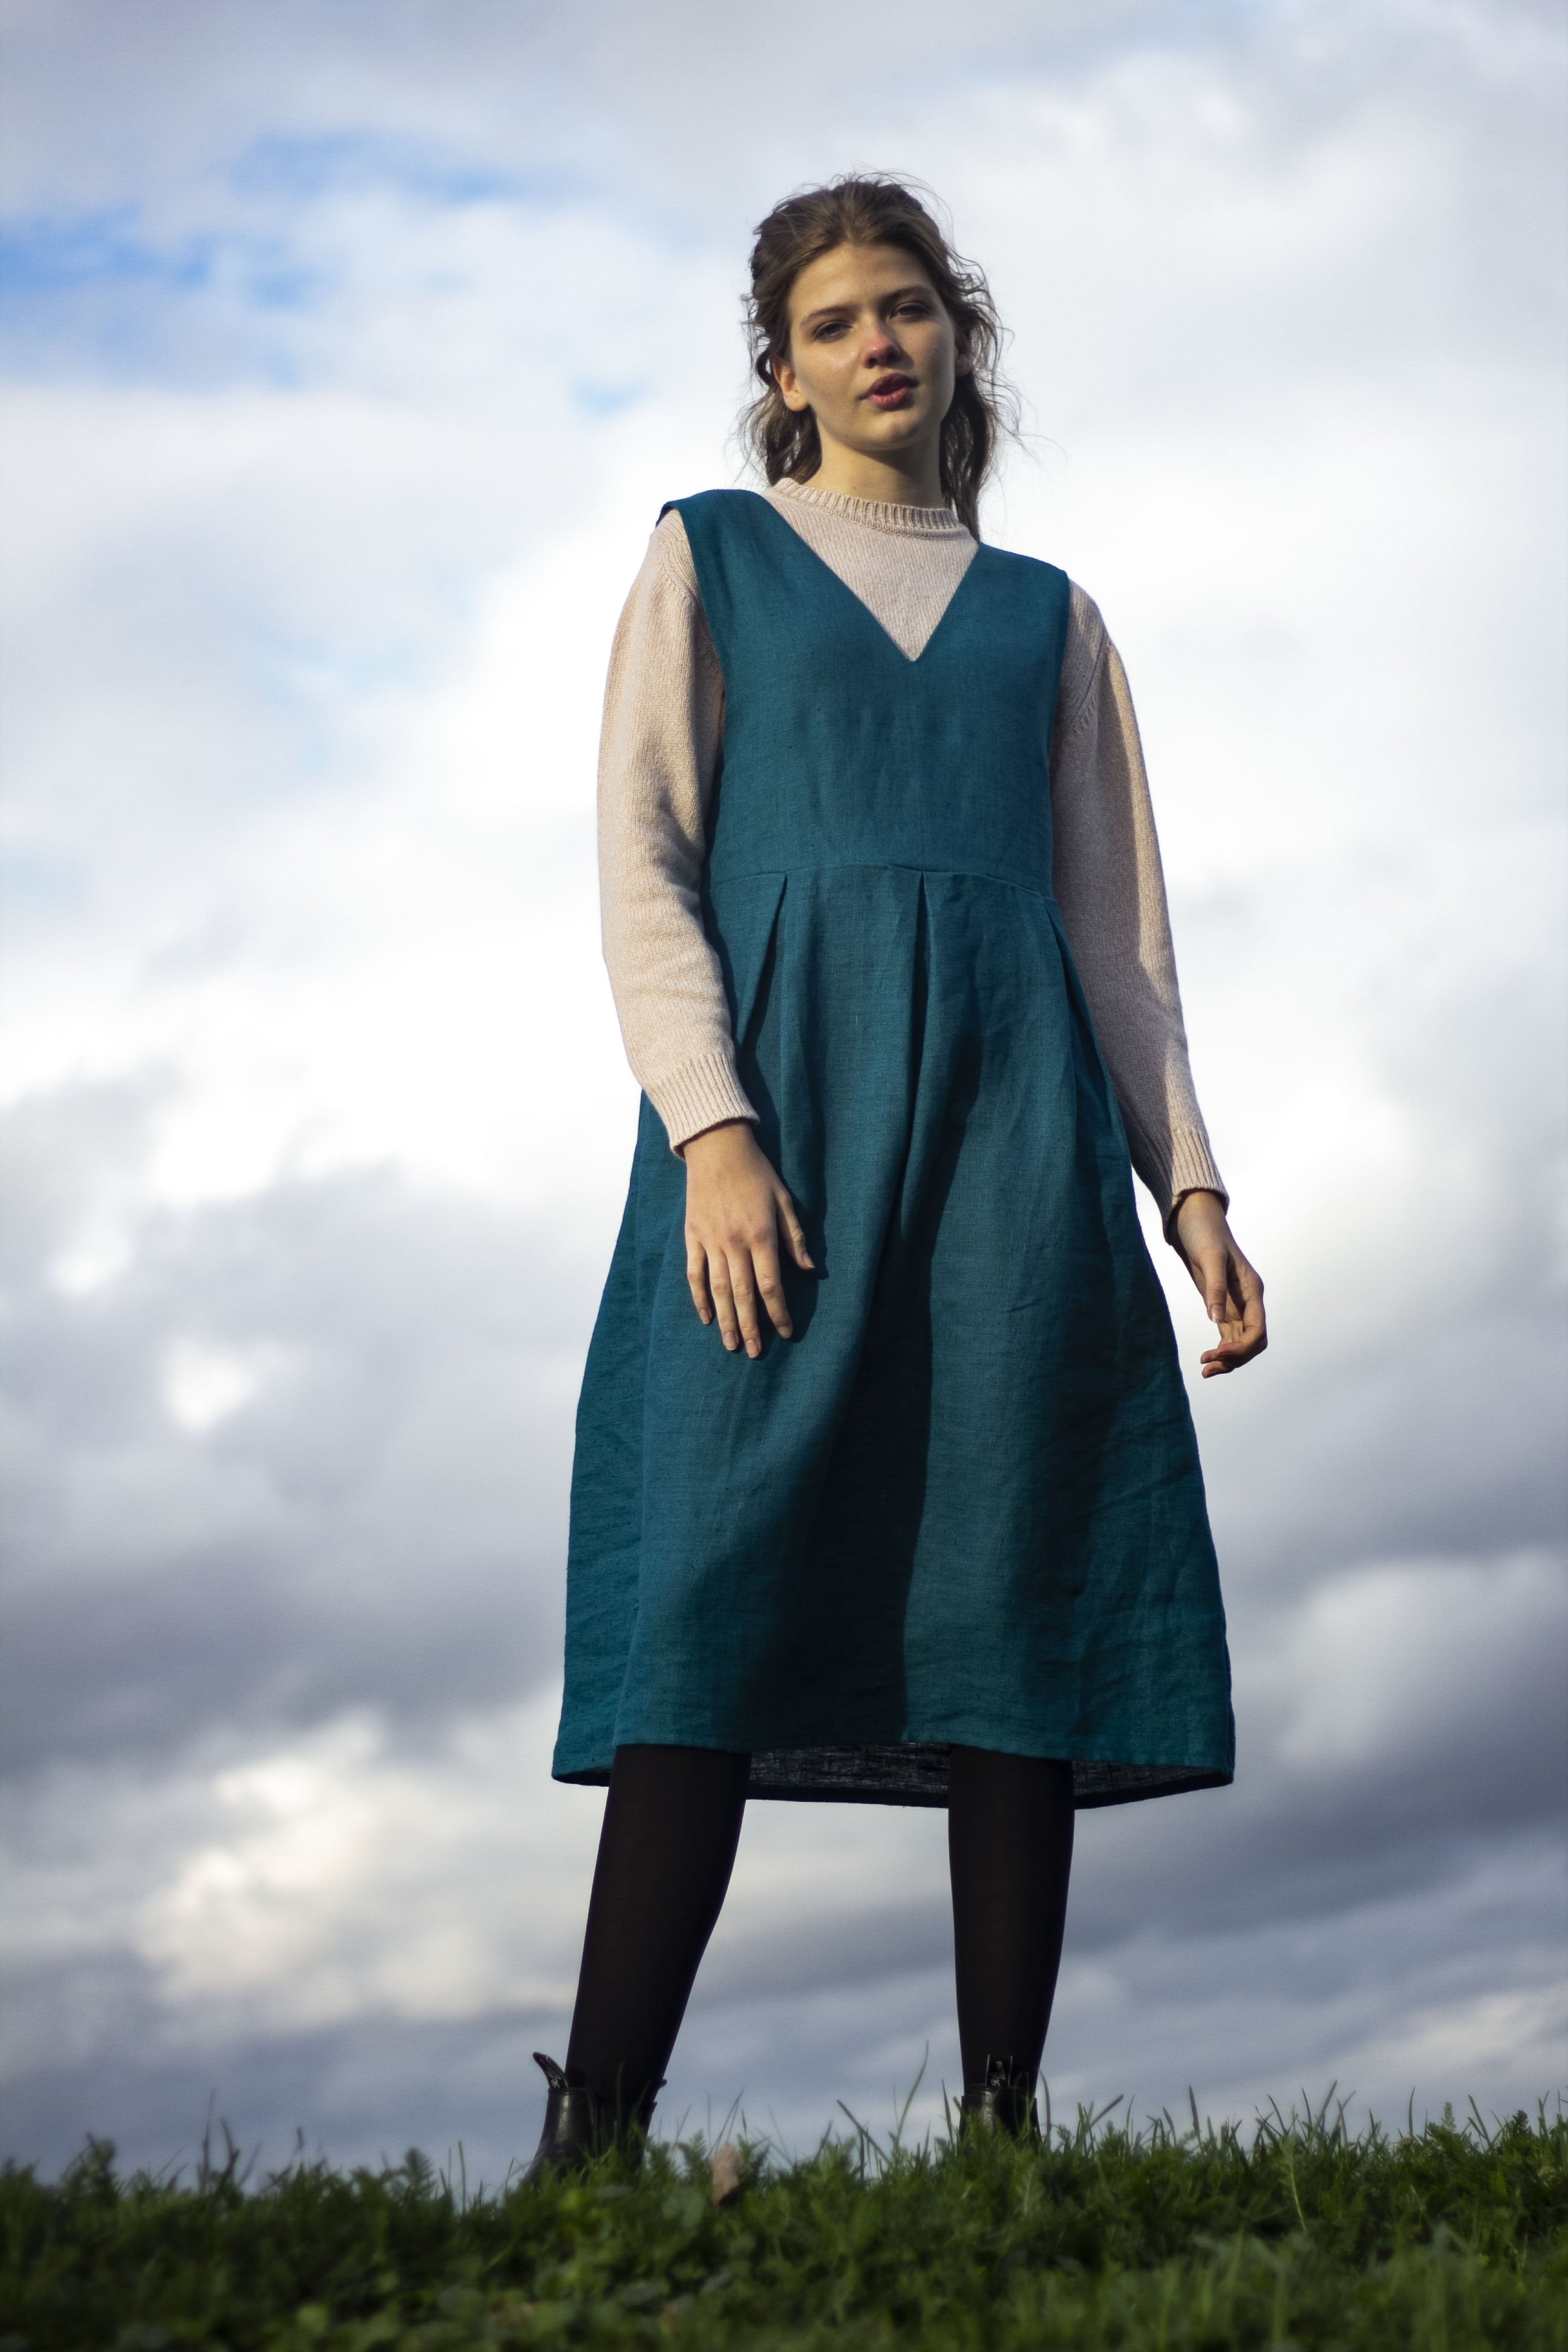 Apron dress in turquoise/blue made from 100% linen